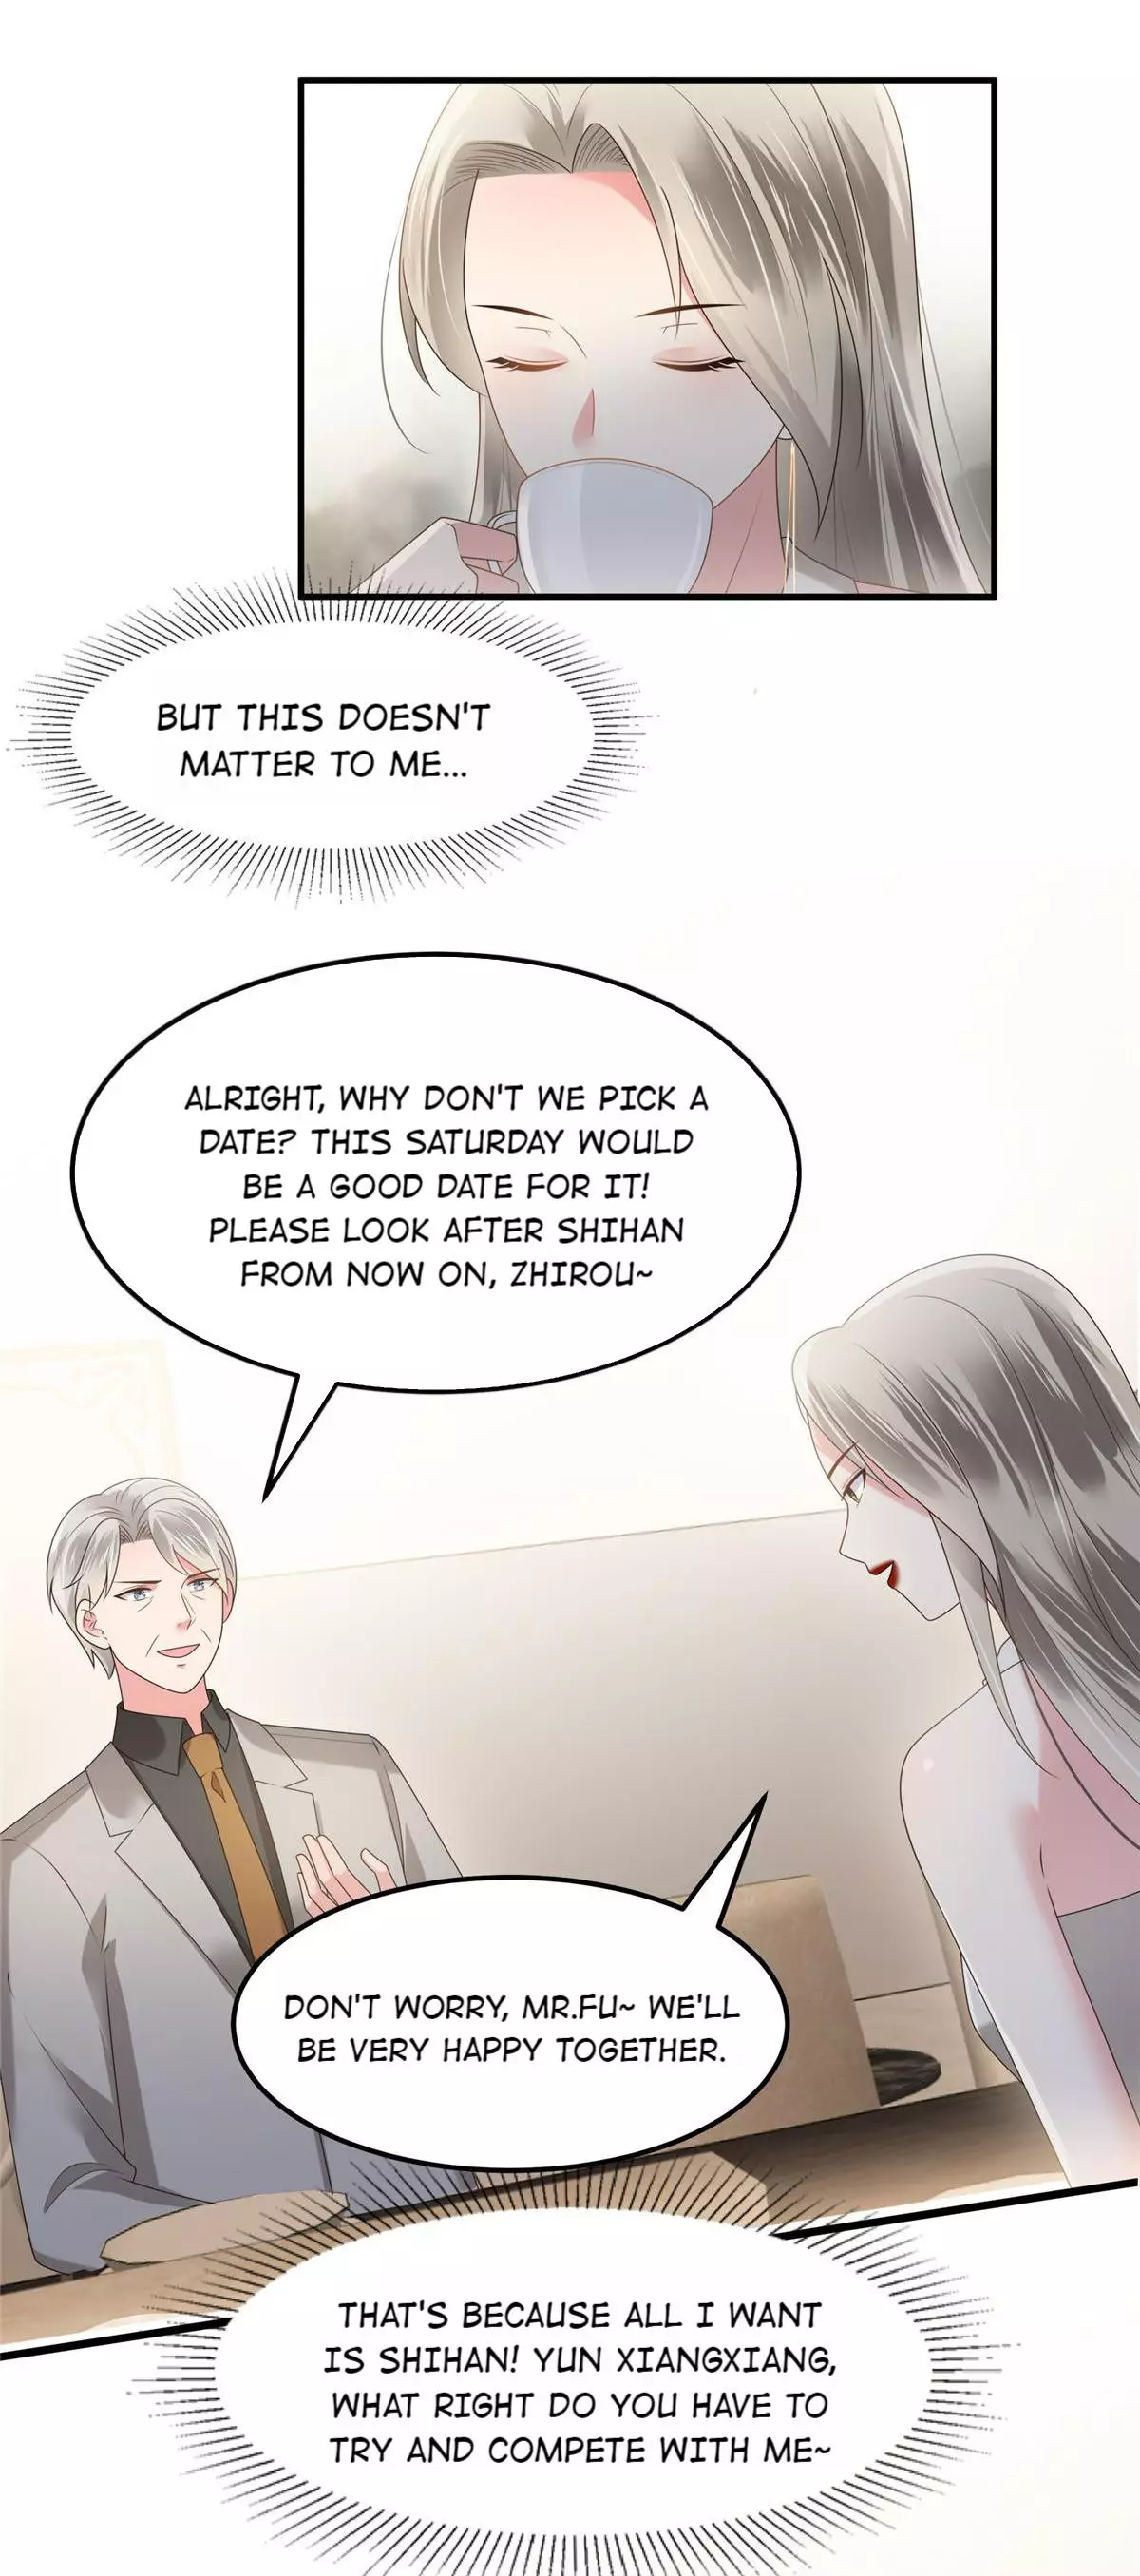 Rebirth: Giving You My Exclusive Affection - 181 page 2-5c1d76f9